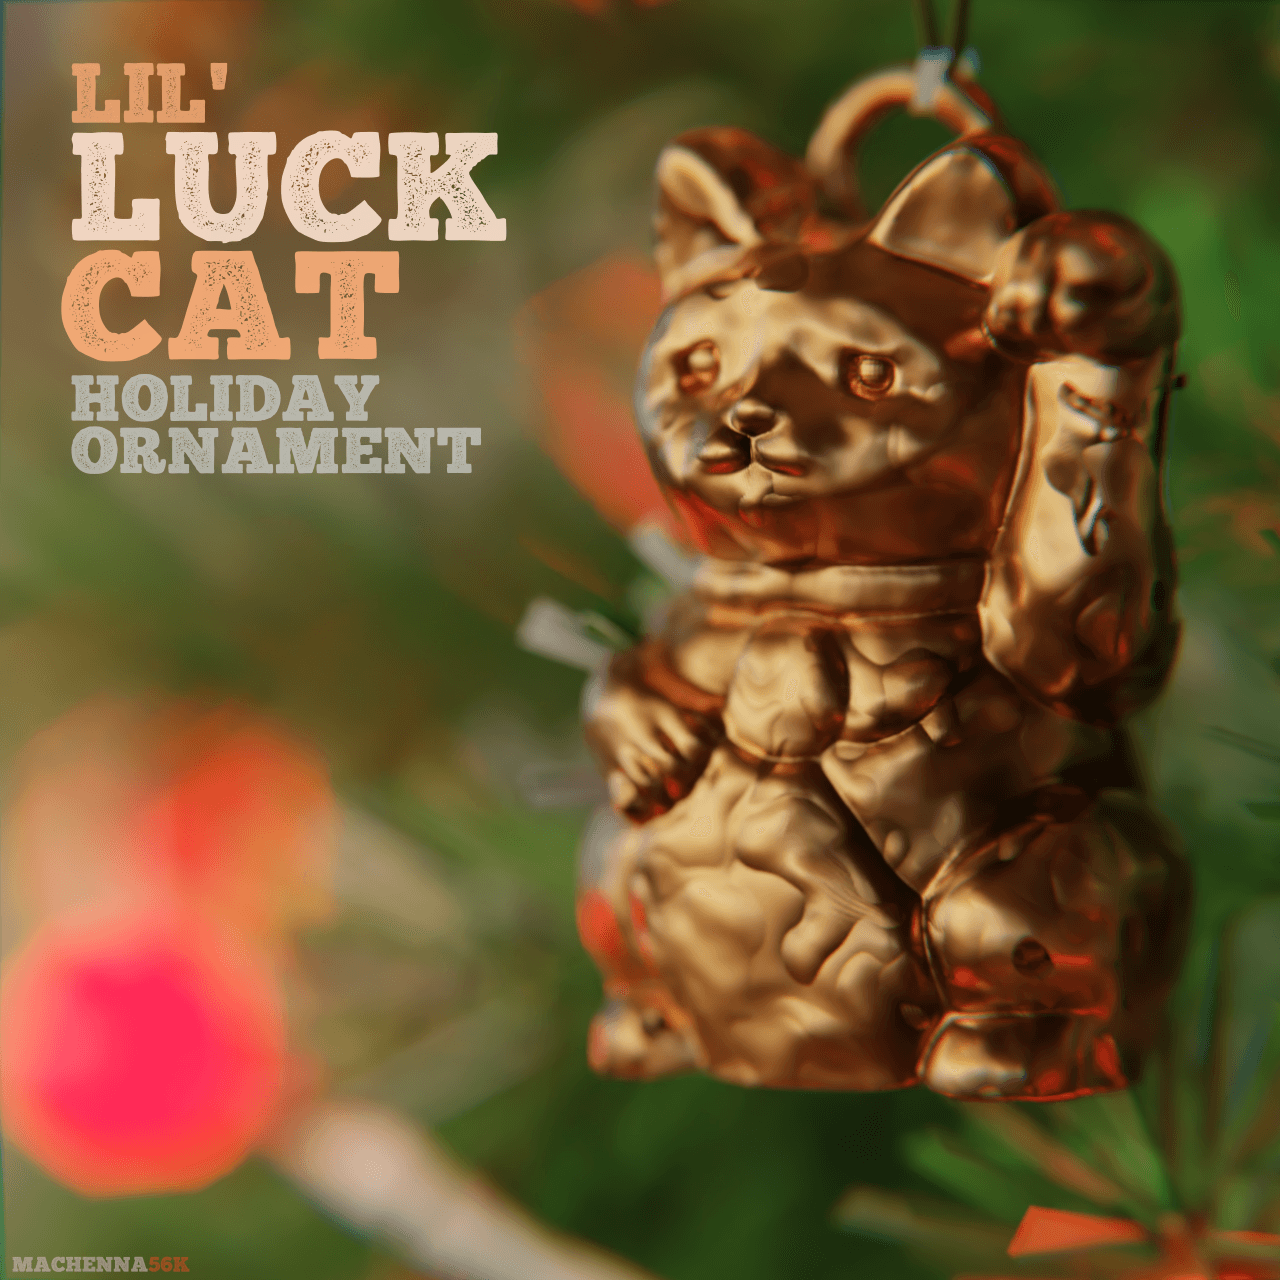 Lil' Luck Cat | Holiday Ornament 3d model